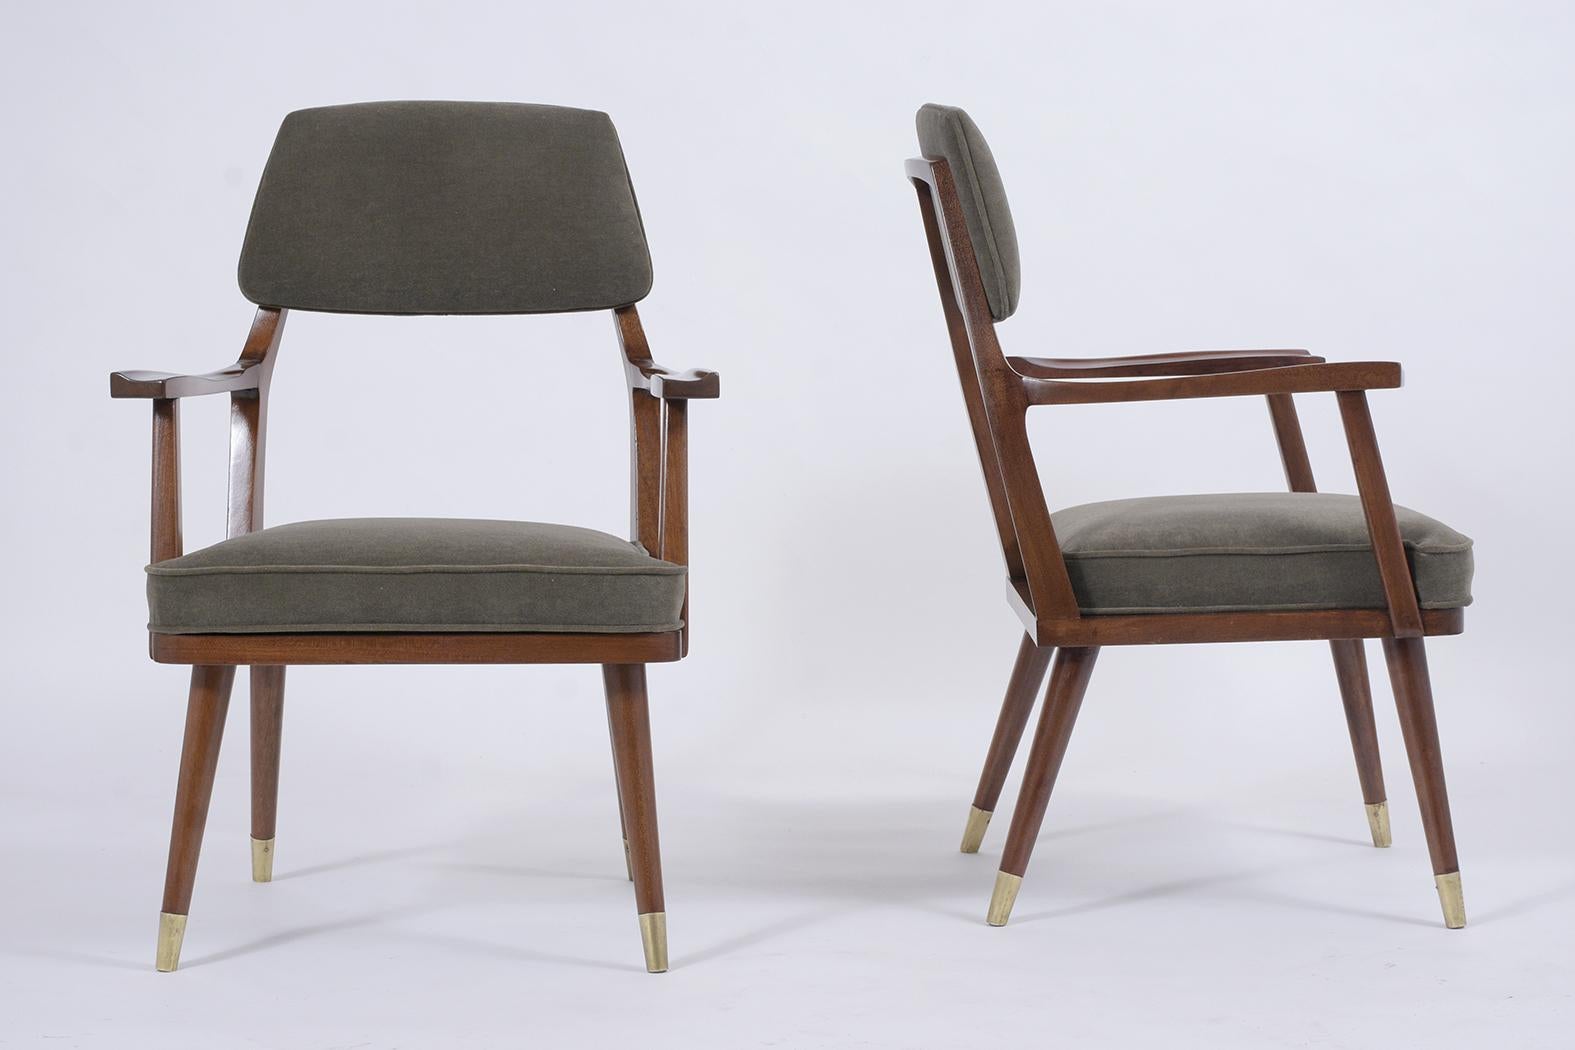 These beautiful Mid-Century Modern armchairs are expertly crafted out of walnut wood and are professionally restored. This set of side chairs features a sleek design frame newly stained in a dark walnut color with a lacquer finish and has